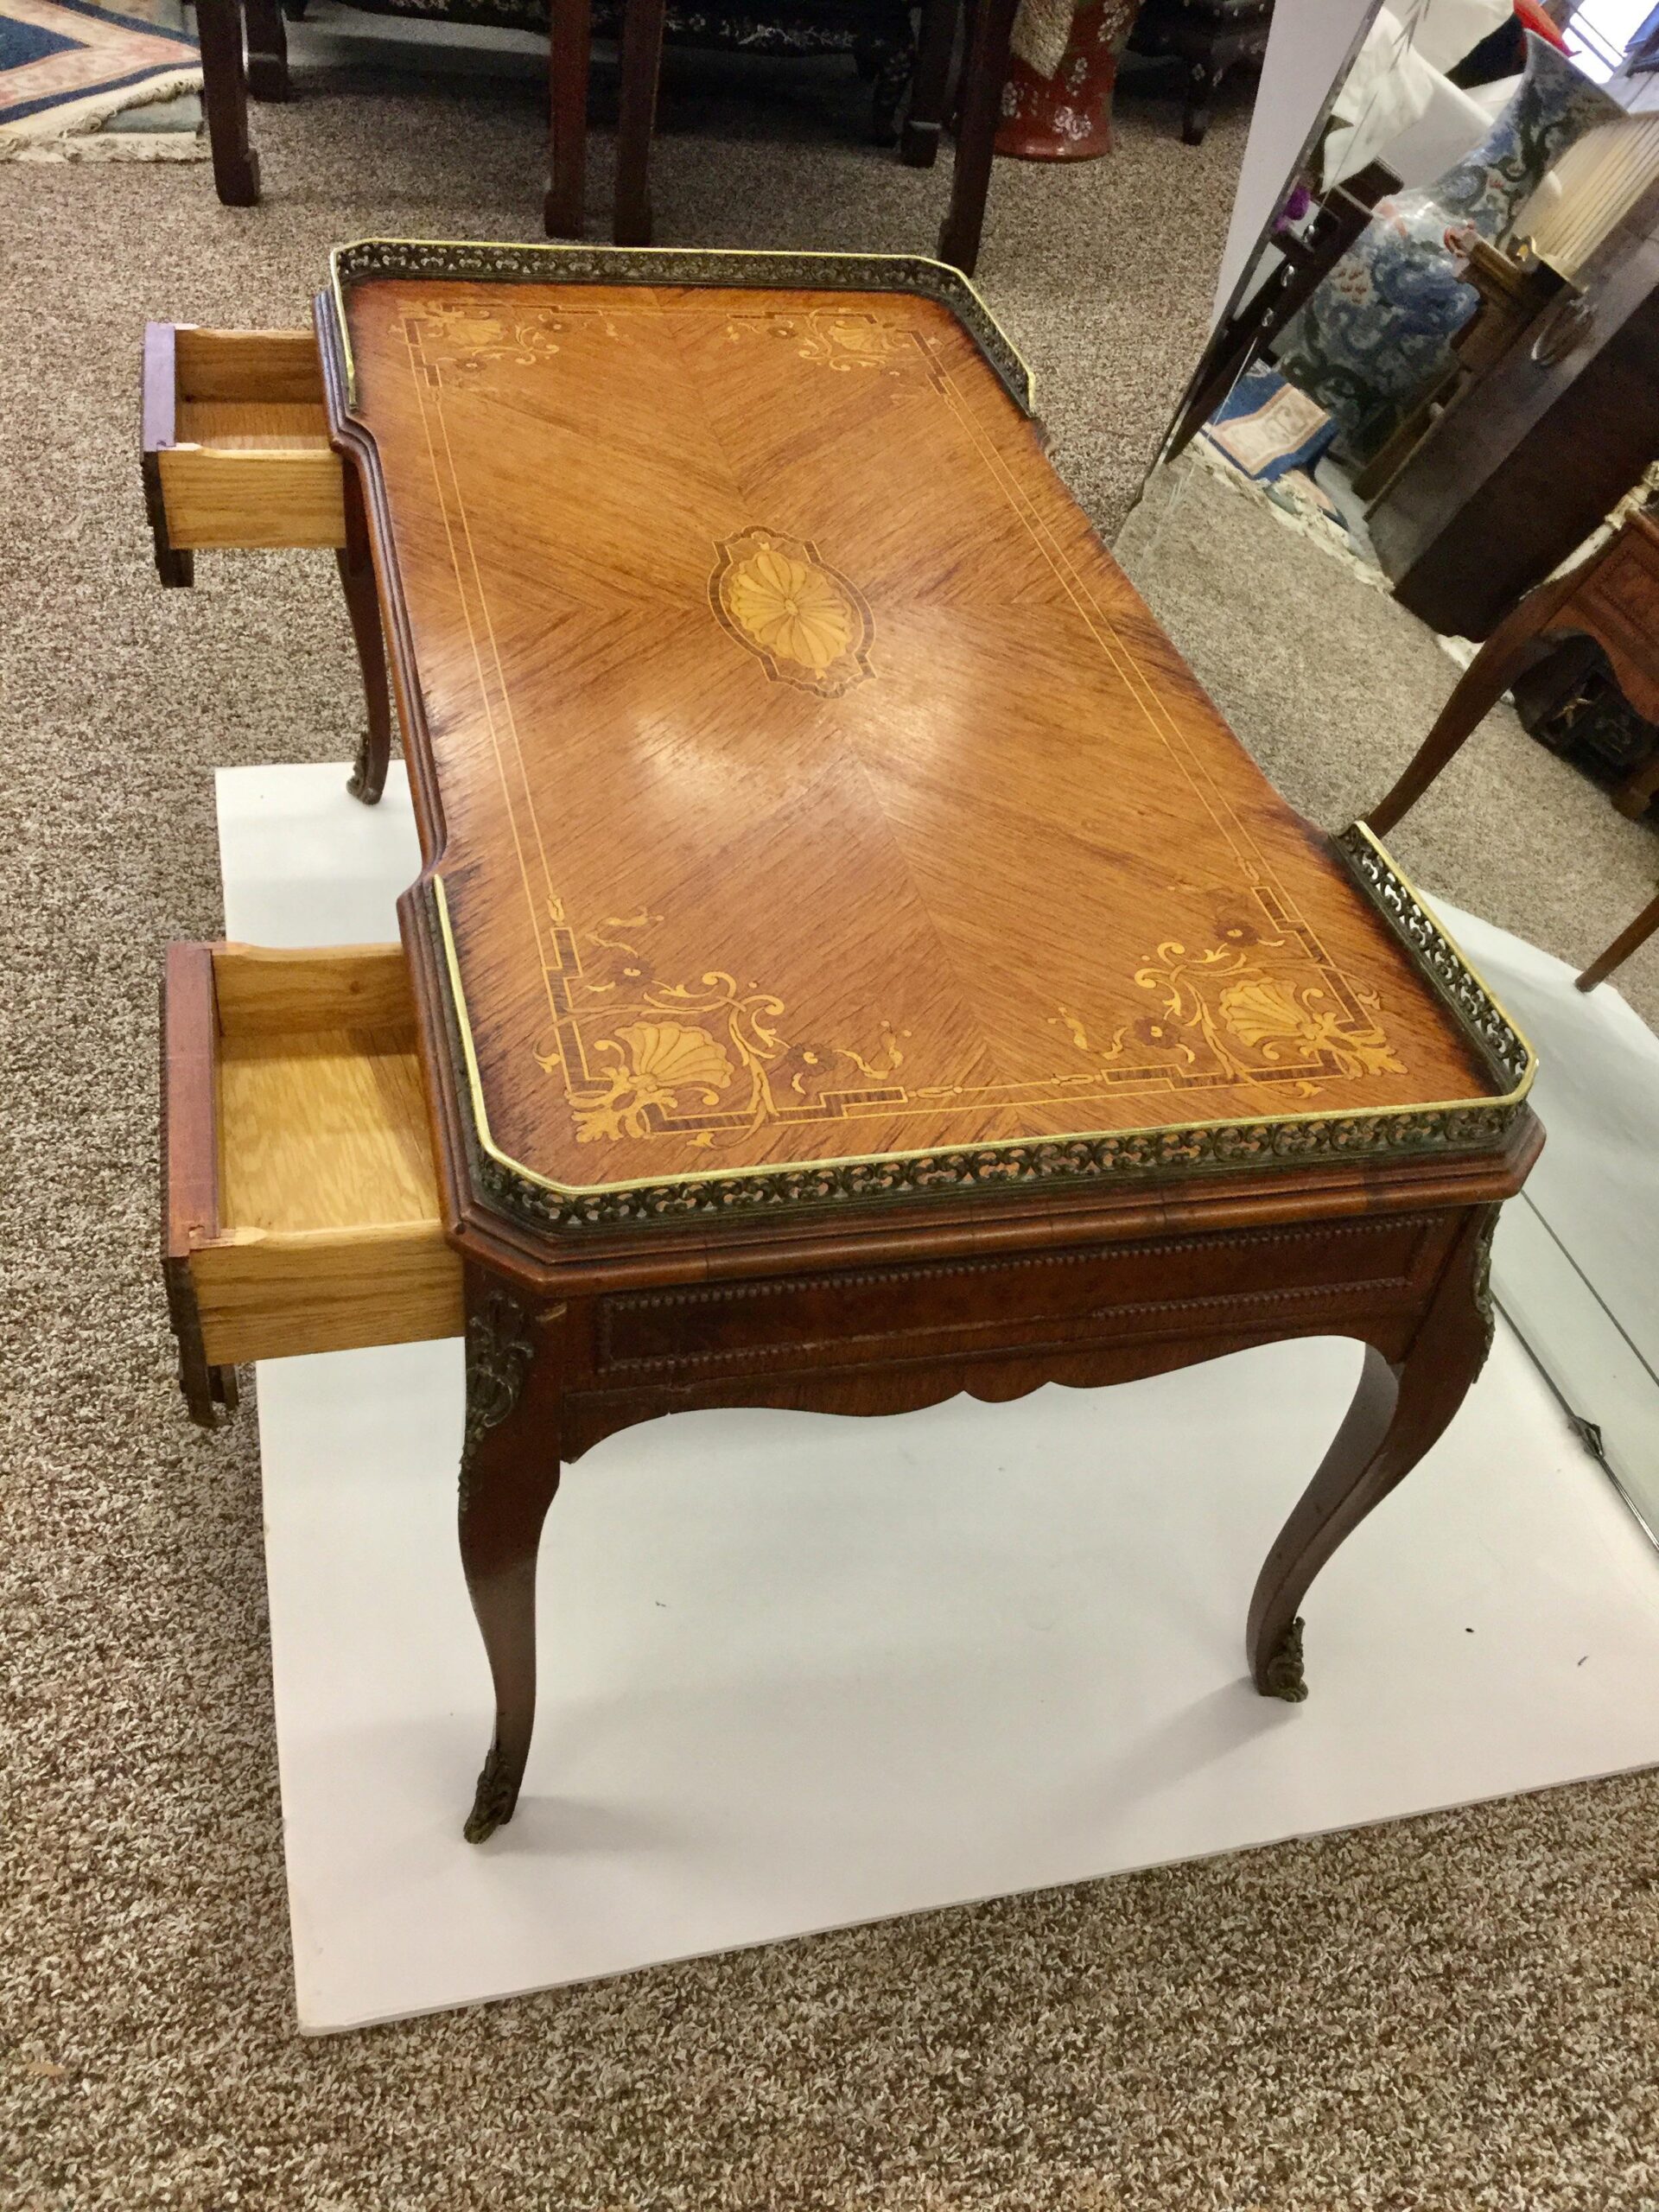 Antique Inlaid Glass Top French Coffee Table | Chairish